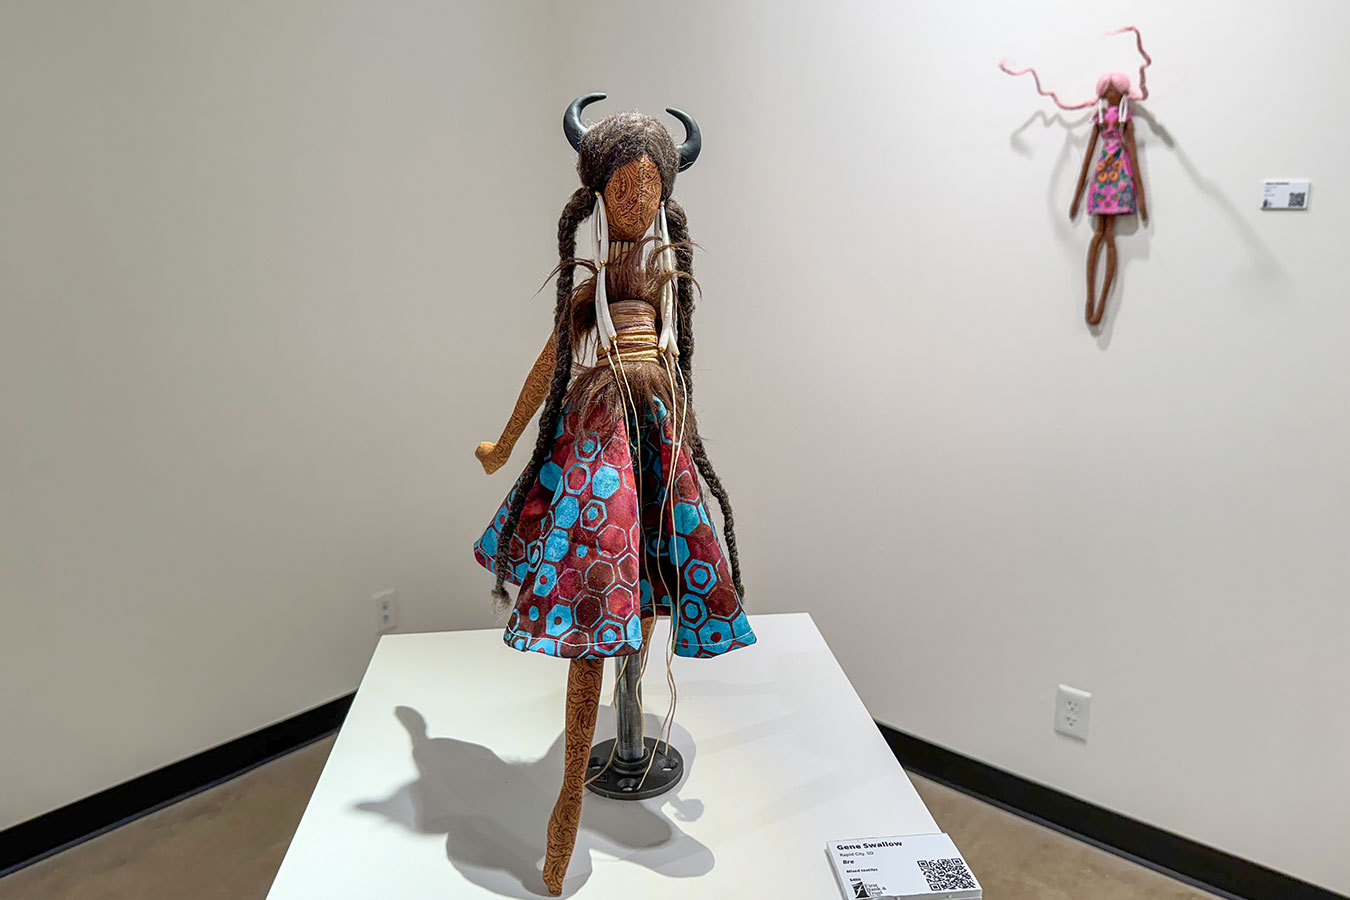 Gene Swallow's exhibition Modern Lakota featuring dolls he created is on display in the gallery at DSU through April 15.